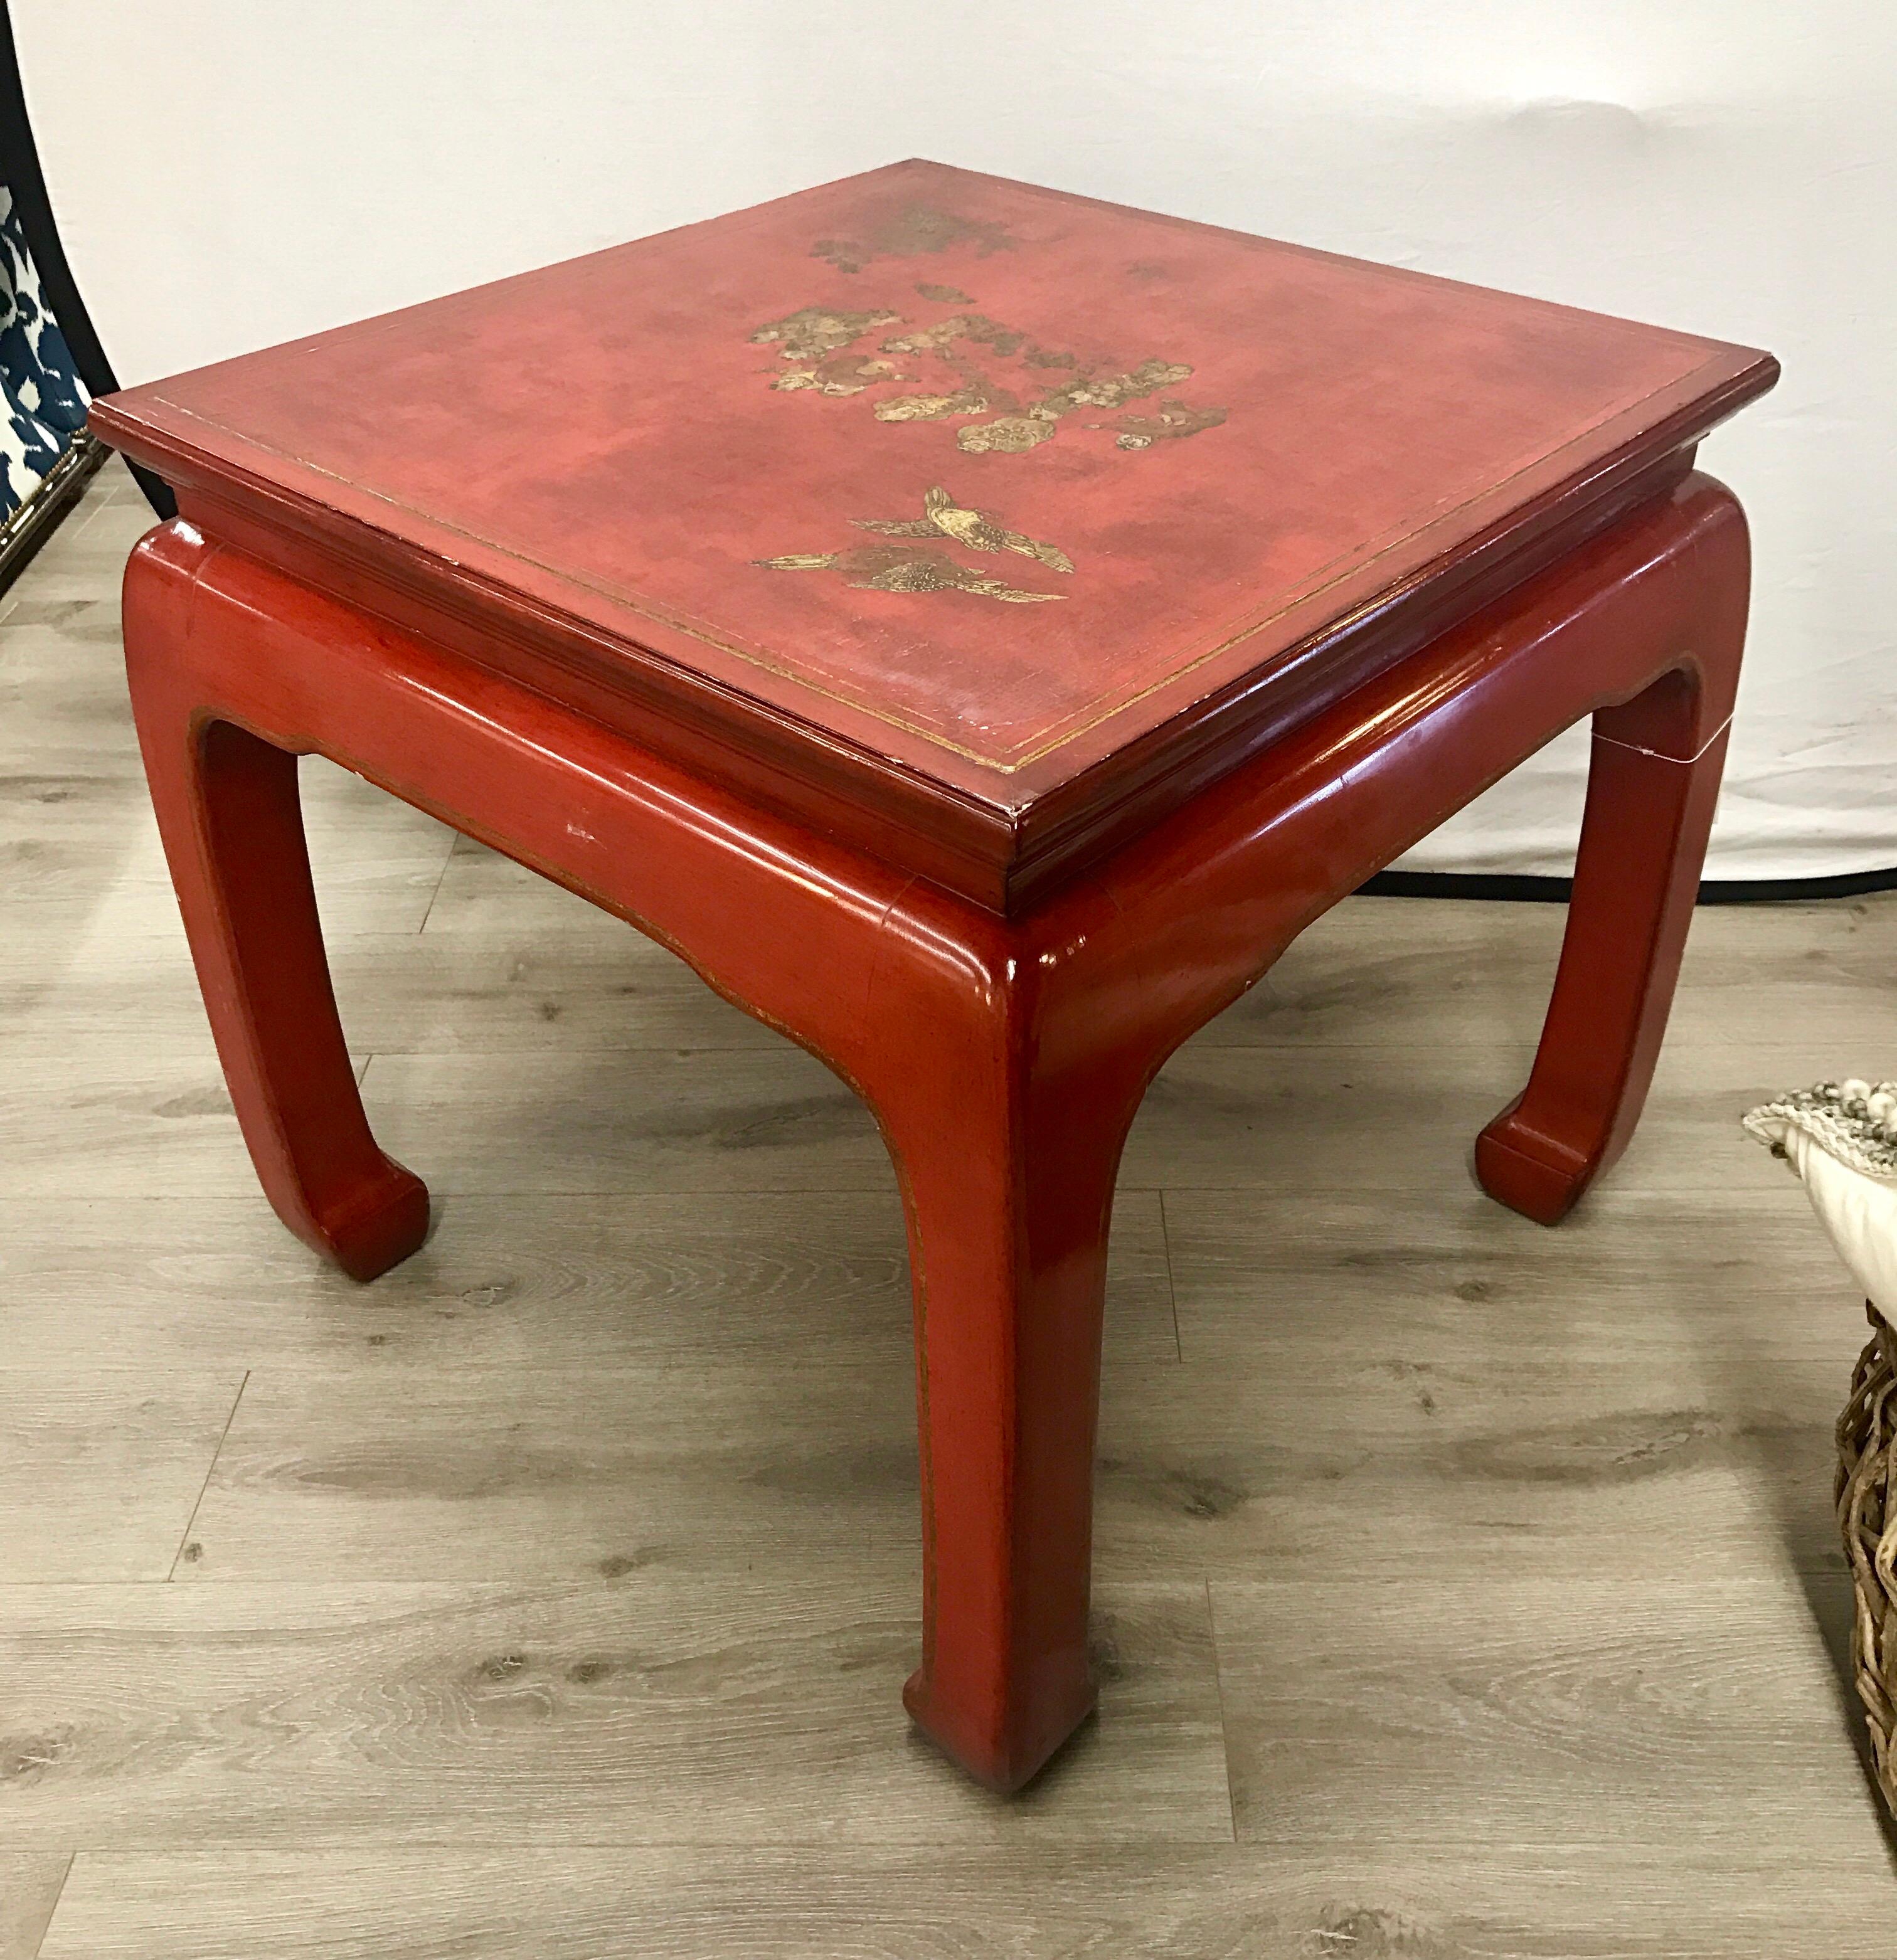 Elegant red lacquer end table or occasional table with hand paintings. In the style of James Mont.